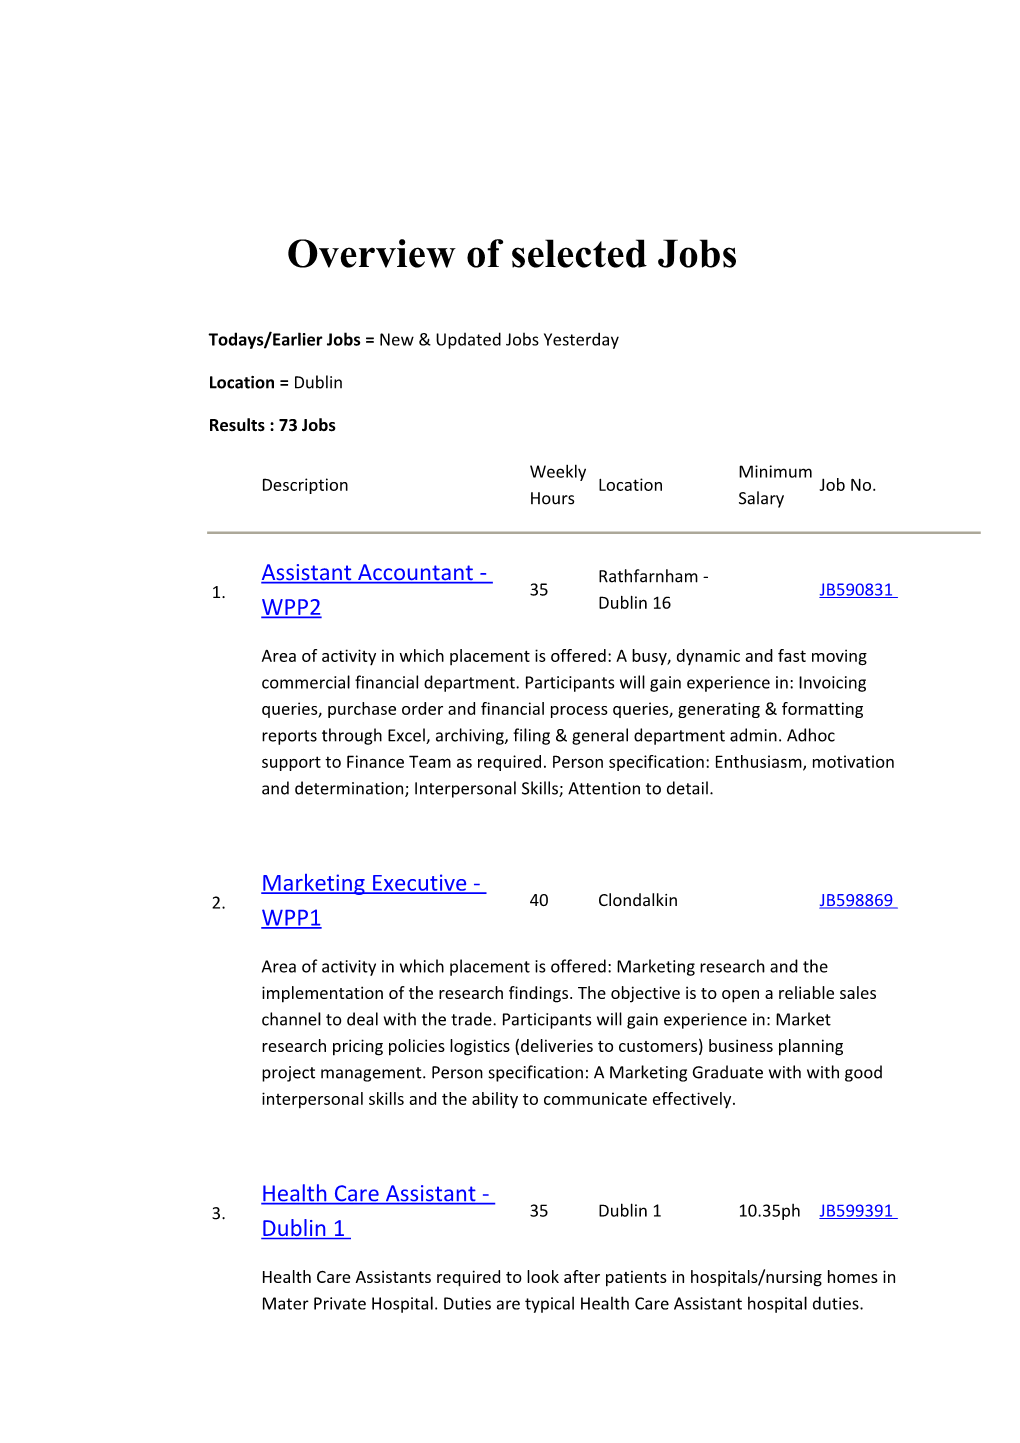 Overview of Selected Jobs